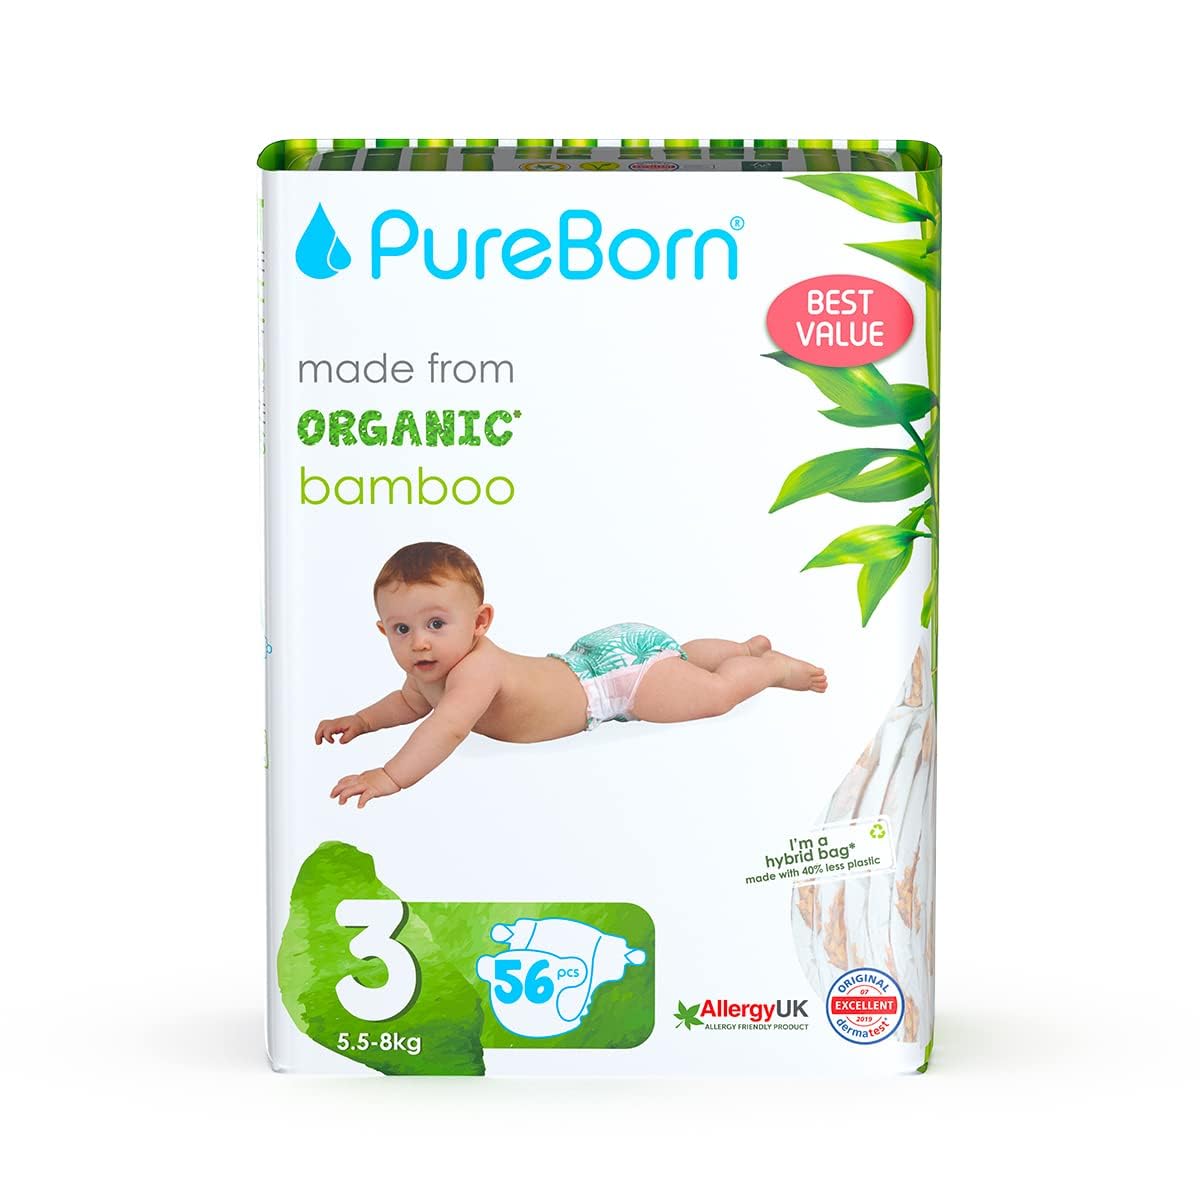 Pureborn Organic Natural Bamboo Baby Disposable Diapers-From 5.5 to 8 Kg - 56 pcs_Pineapple Print_Value Pack_Premium Super Soft_ Maximum Leakage protection_Eco friendly Nappies_New born Essentials